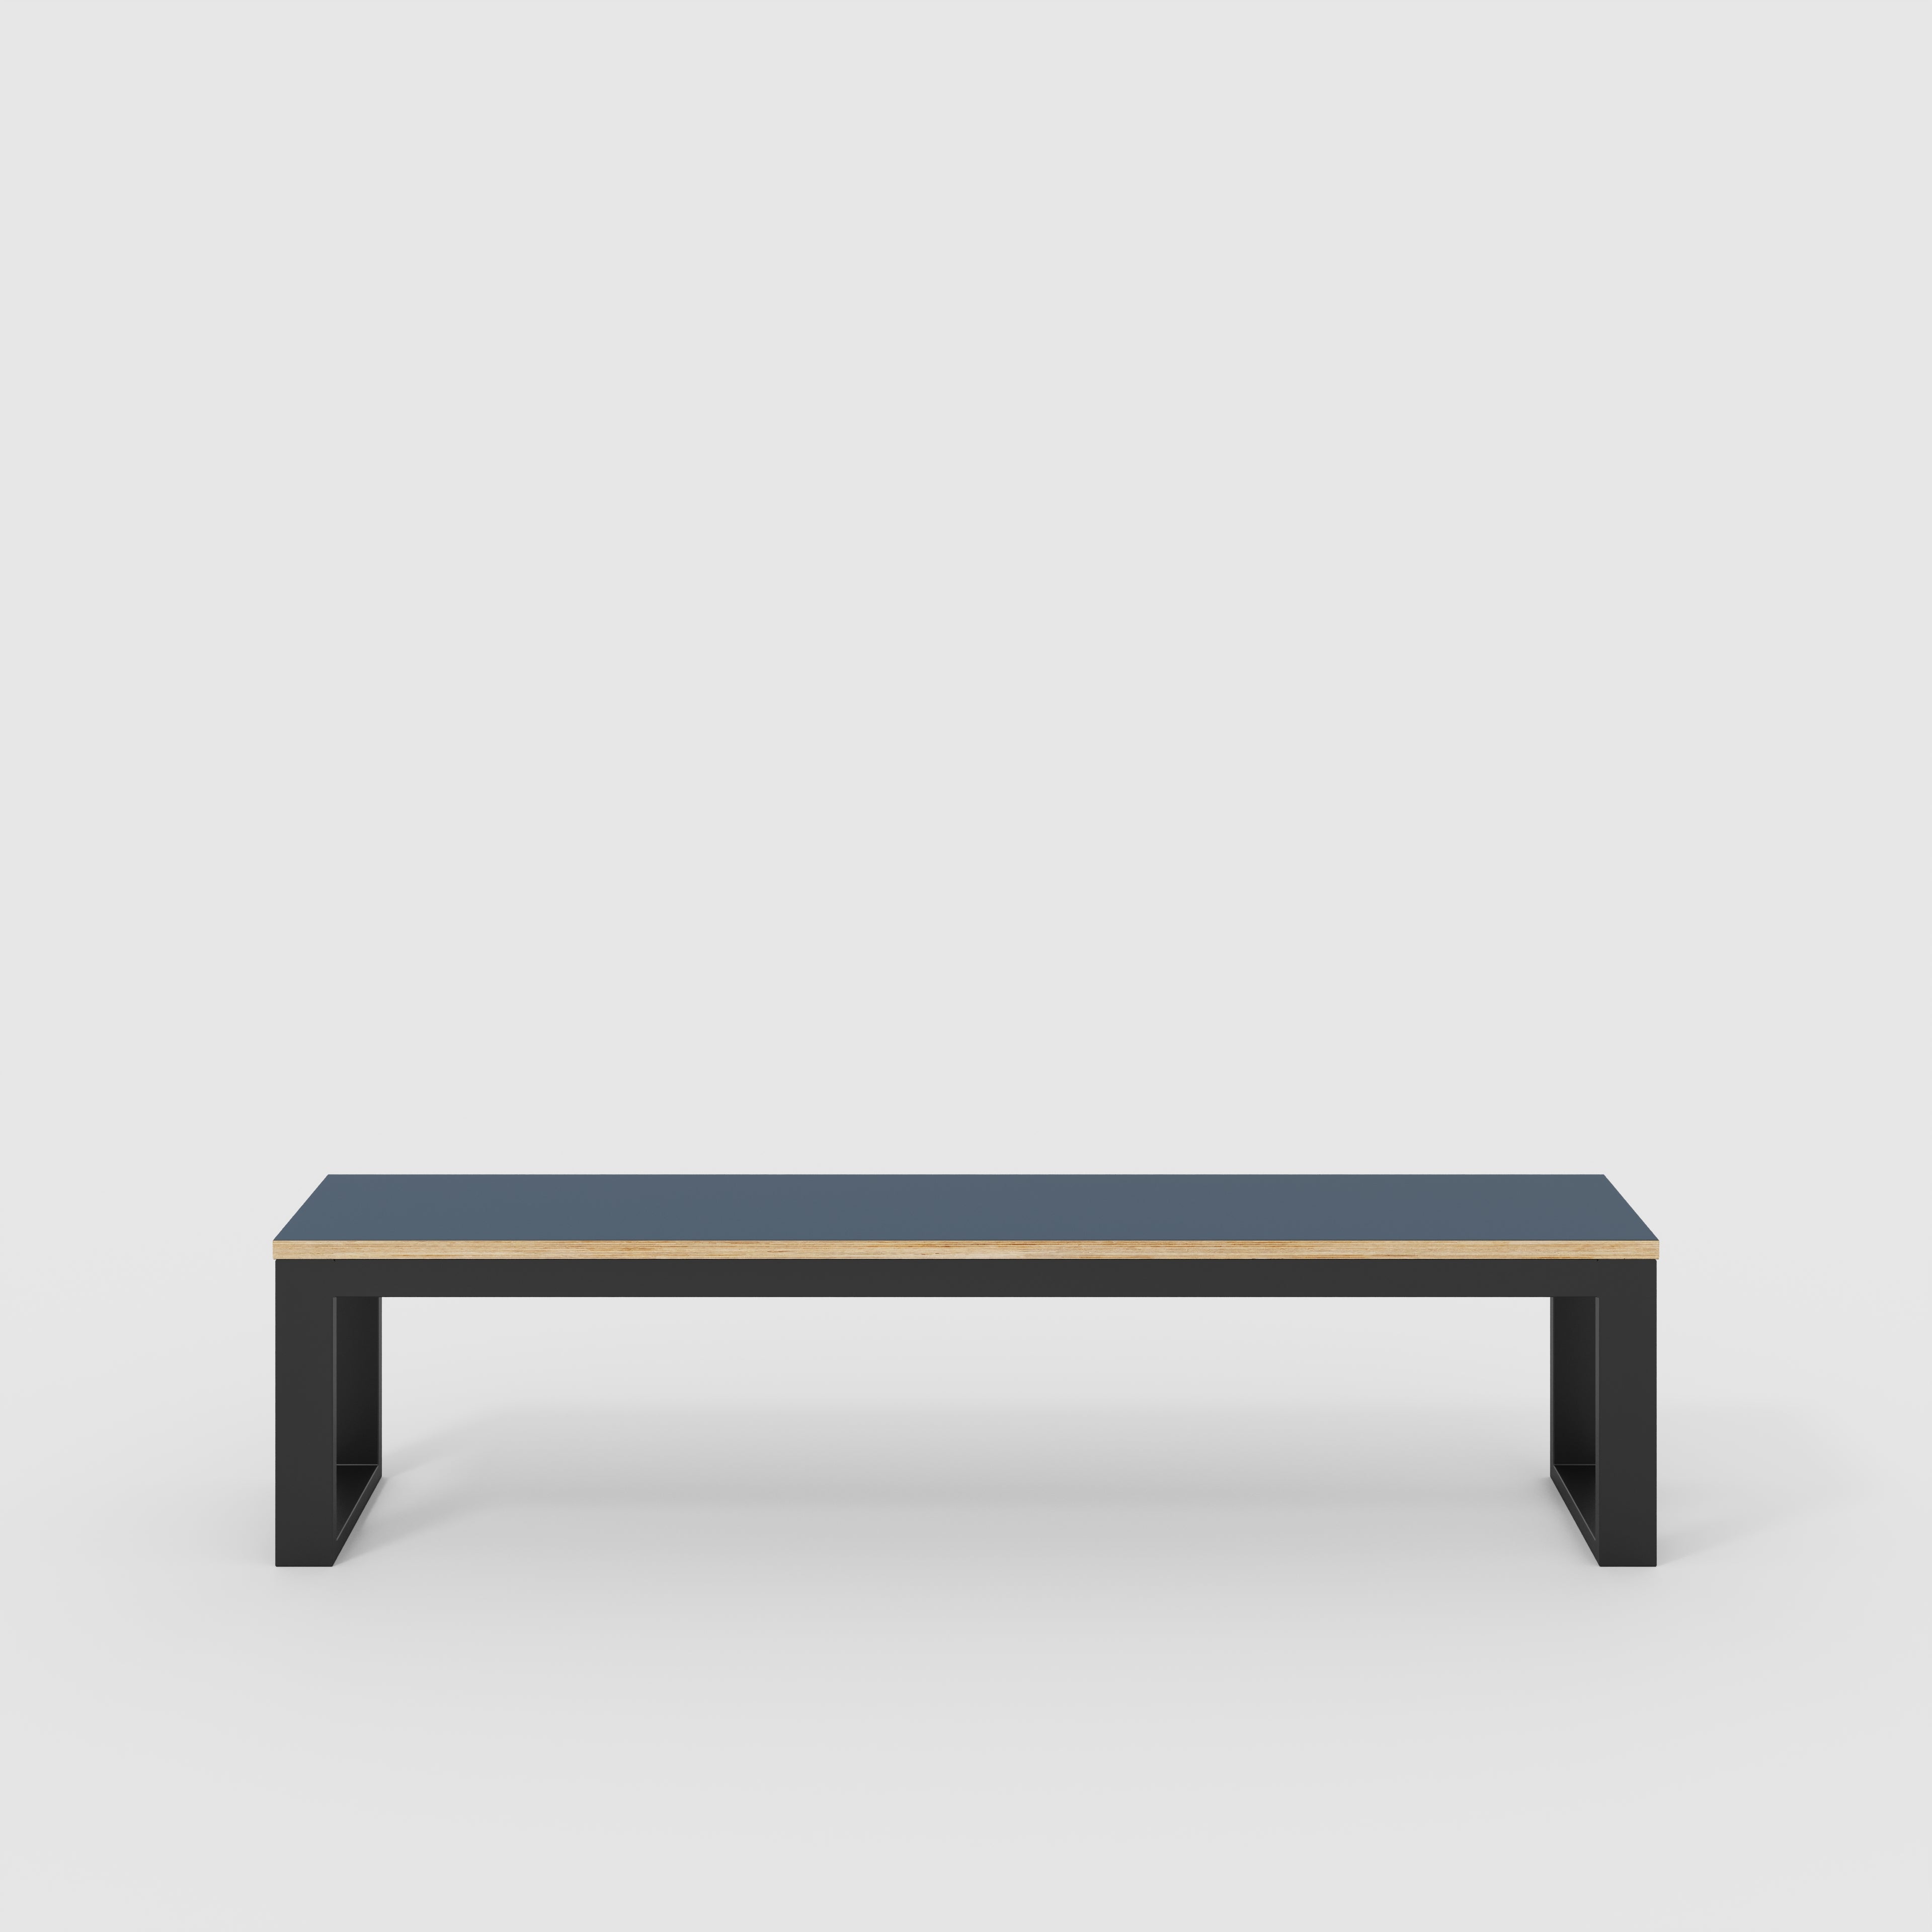 Bench Seat with Black Industrial Frame - Formica Night Sea Blue- 1800(w) x 325(d)